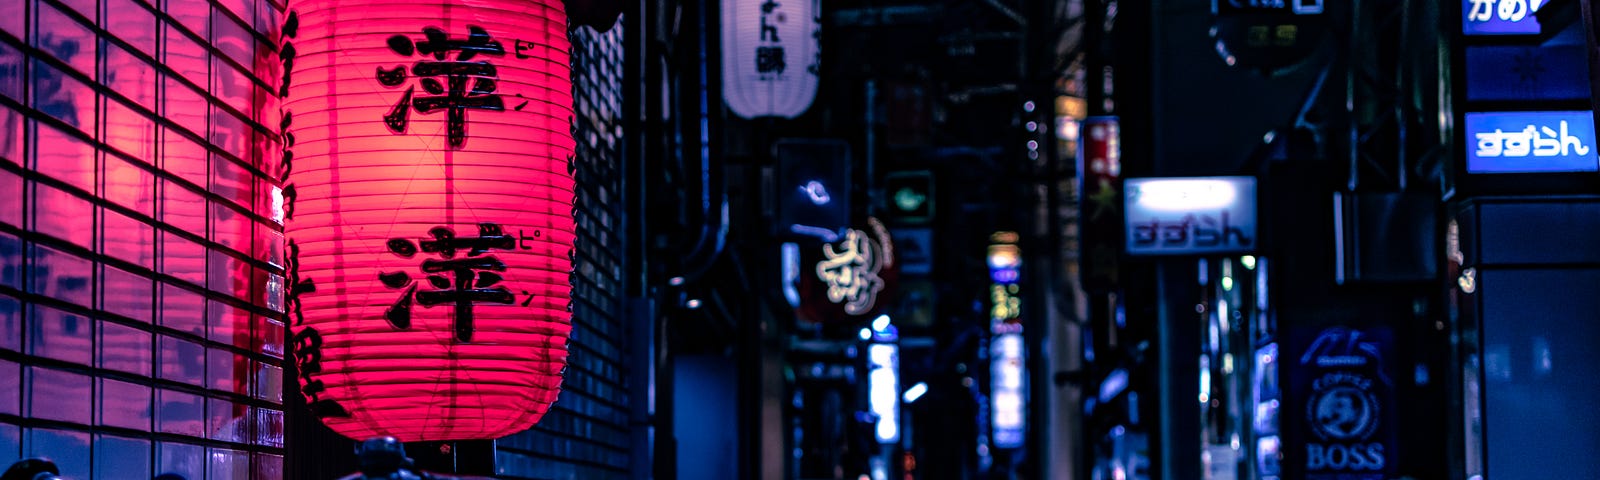 At night, a back alley in downtown Tokyo is lit by business signs